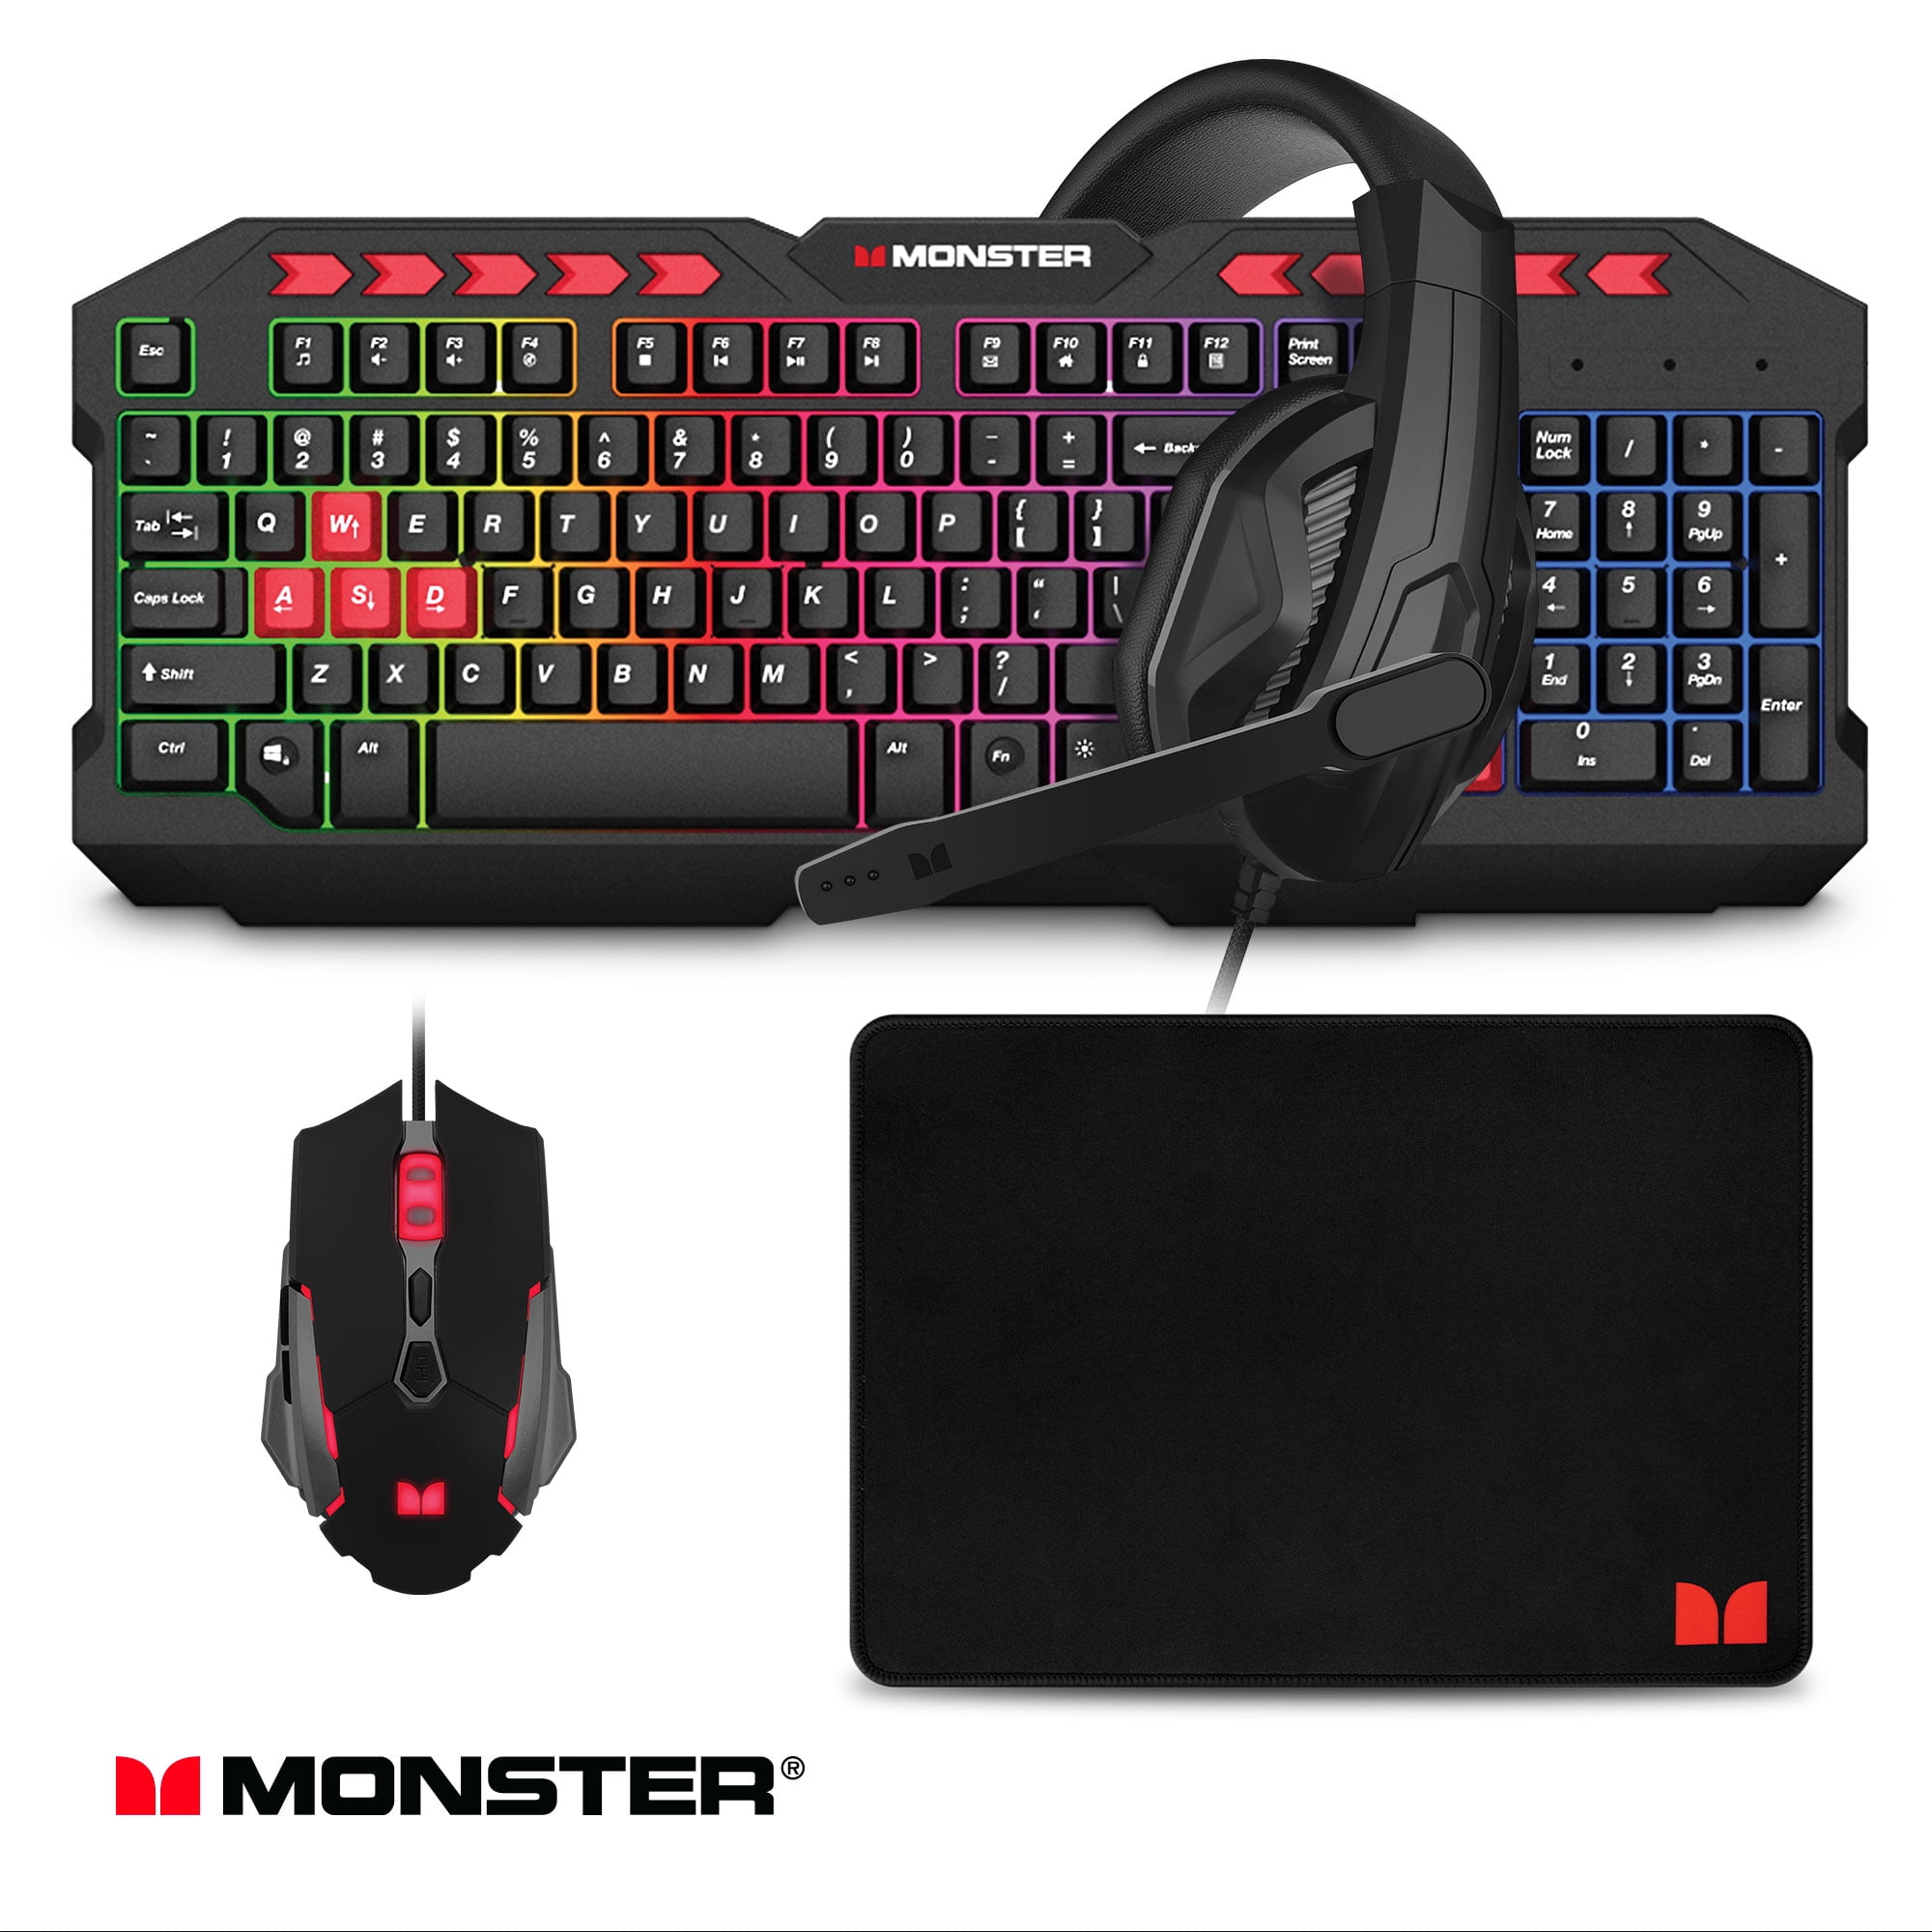 The Best Gaming Accessories 2021: PC Gaming Keyboard, Mouse, Speakers